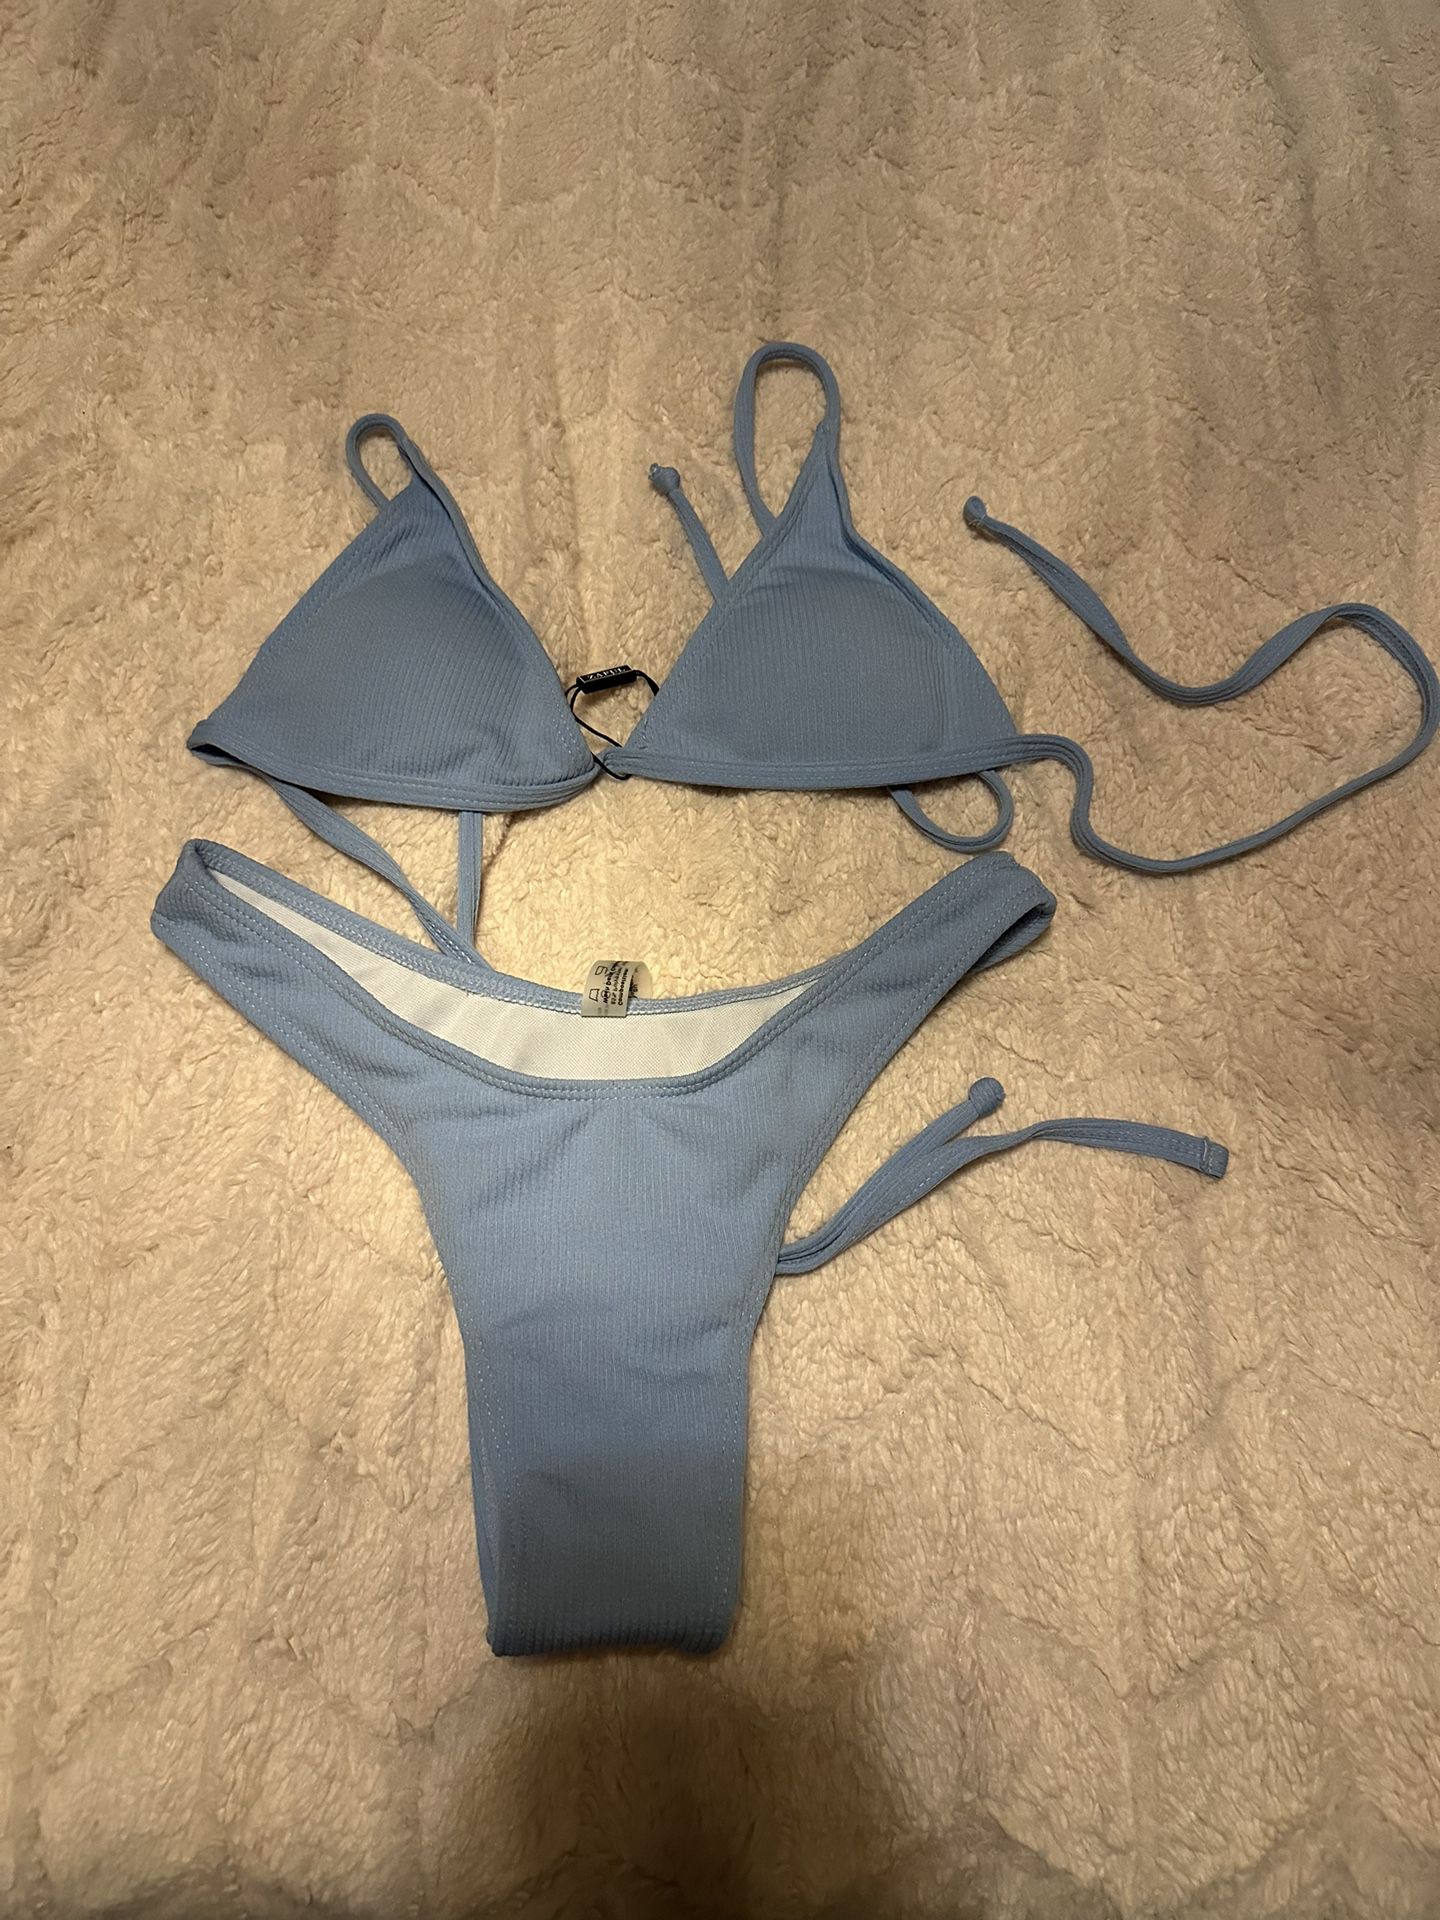 Brand New  3 Color Bikini Swimsuit Set With Blue,  Black, And White From ZAFUL  Xs-S